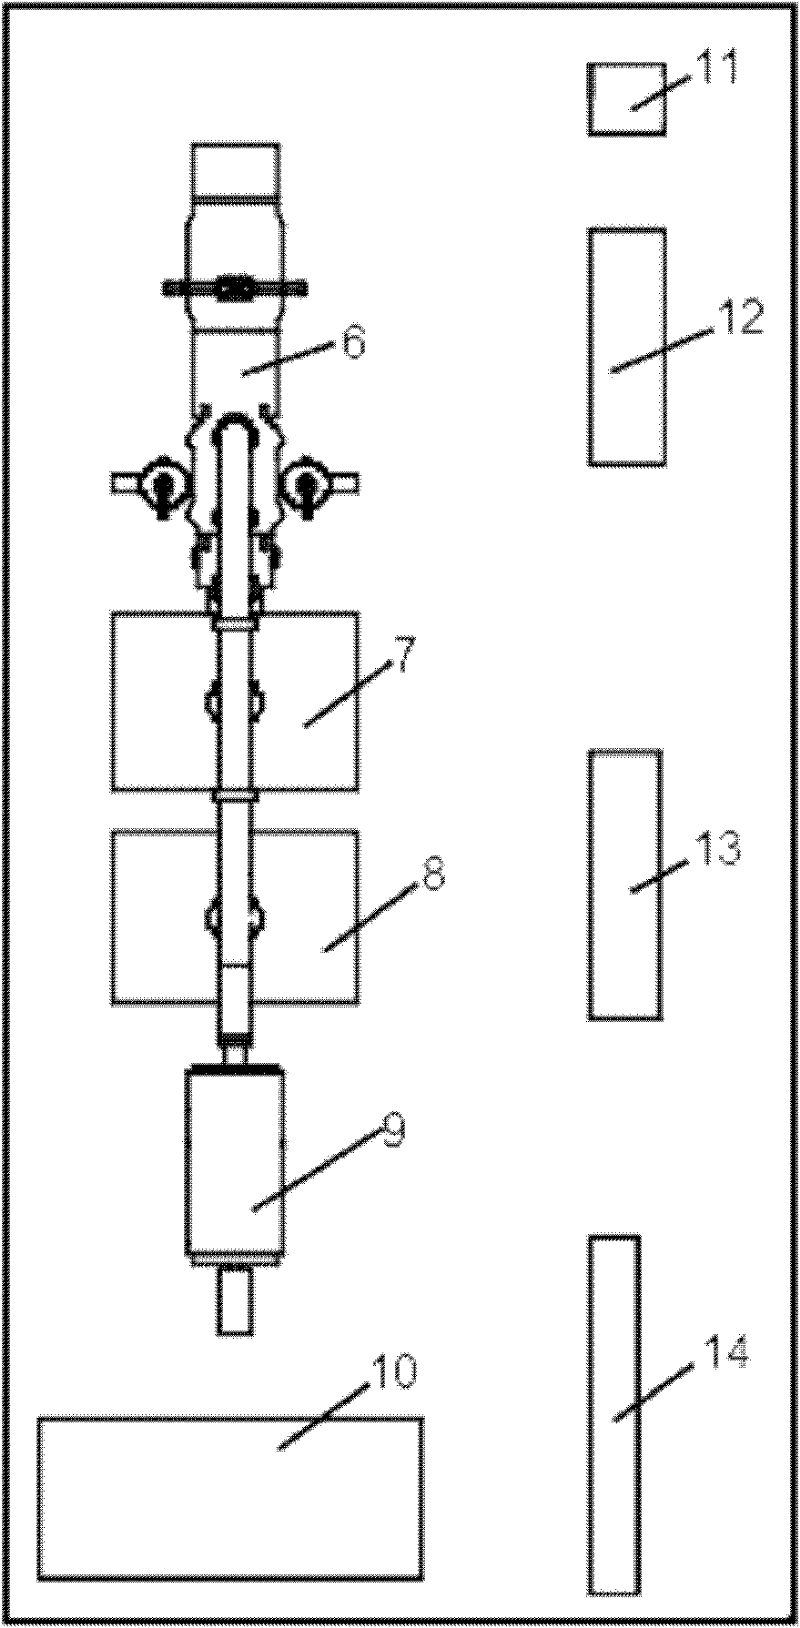 Lateral structure and arranging method of steam turbine generator unit of 1000MW-grade set in thermal power plant